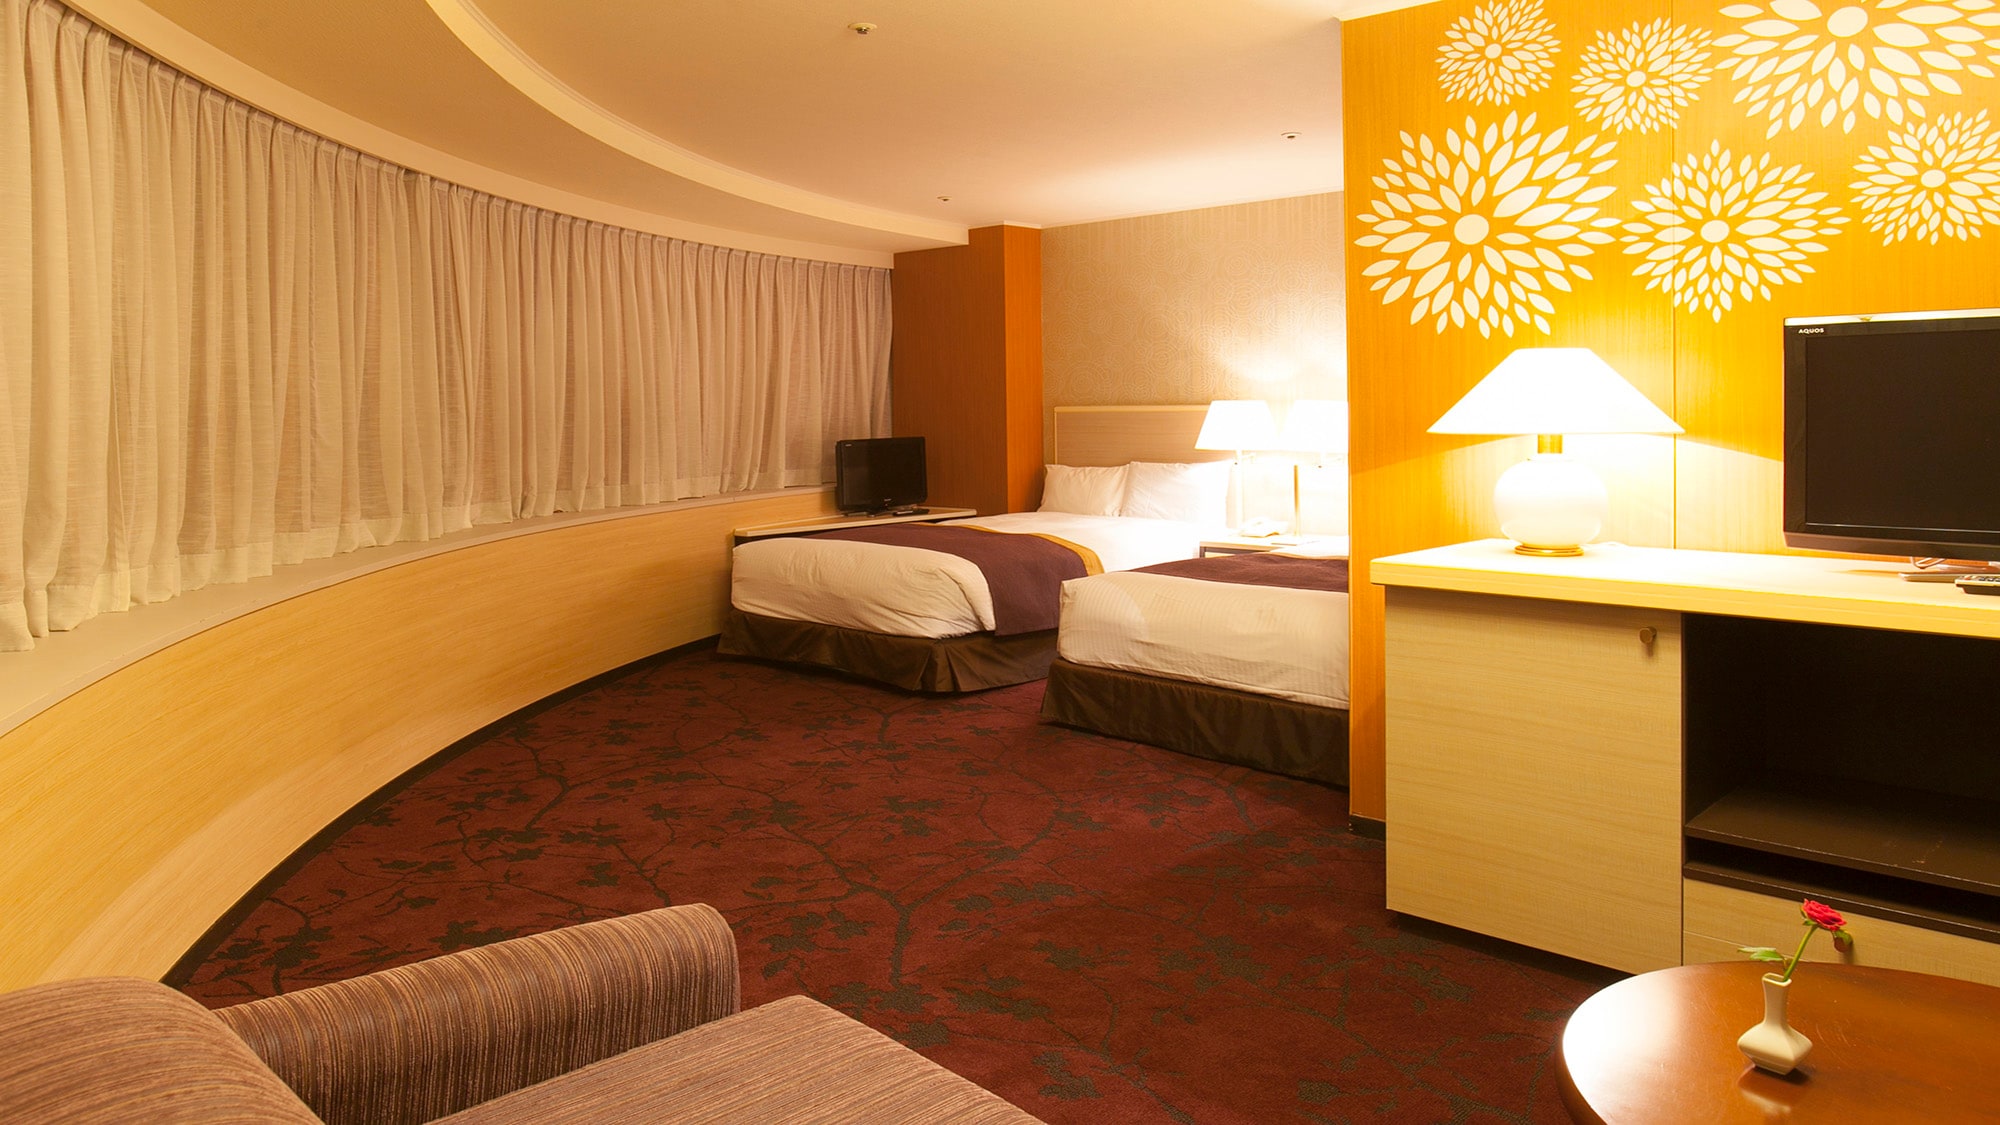 An example of a deluxe twin room